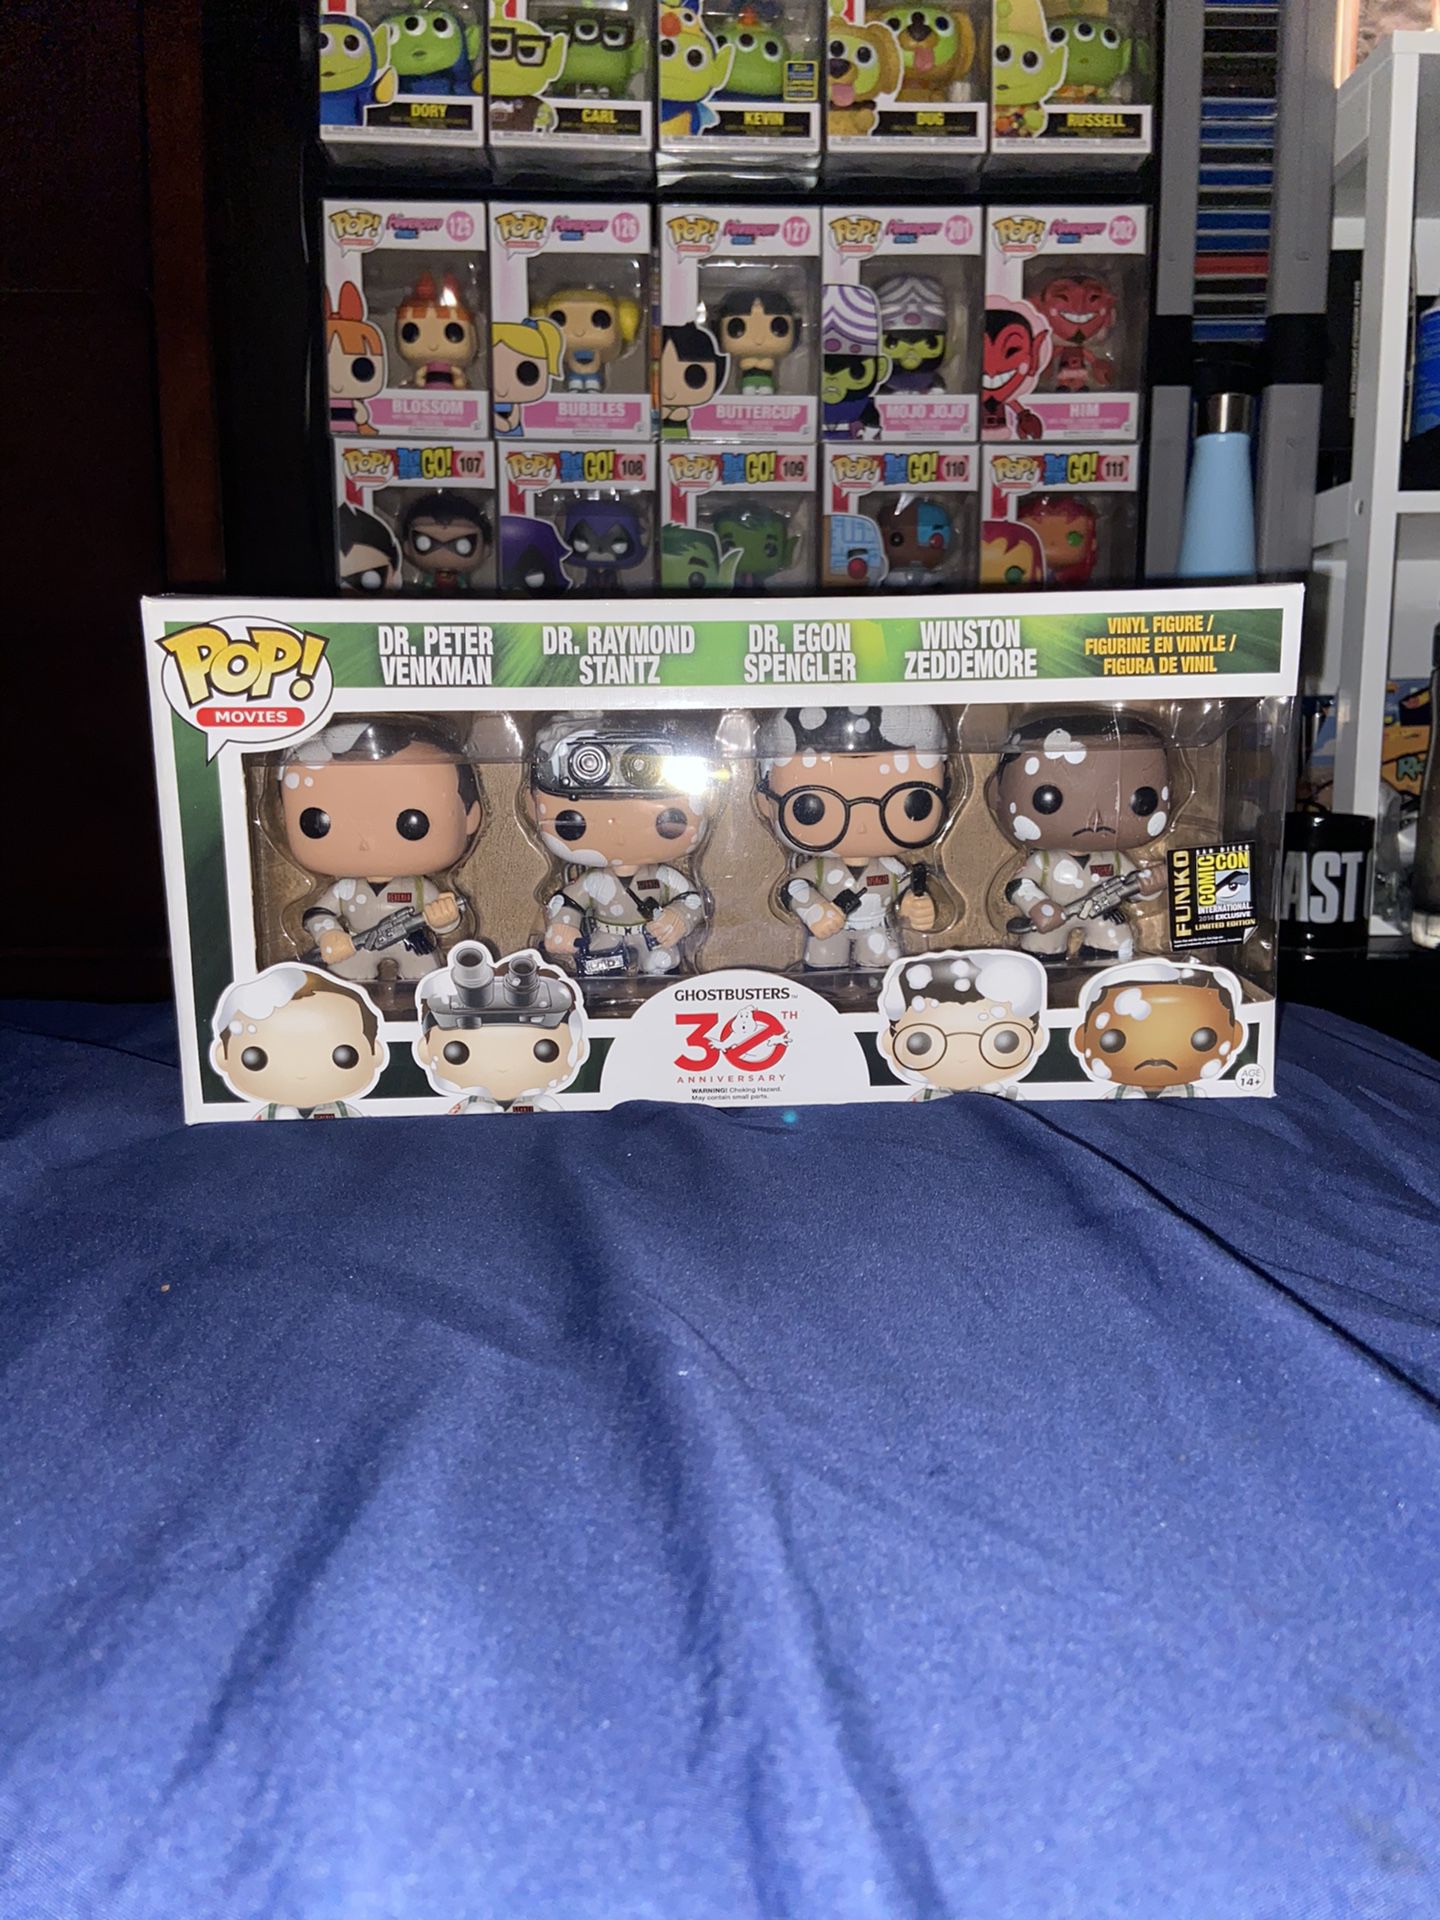 2014 SDCC Ghostbusters 4-Pack Funko Pop